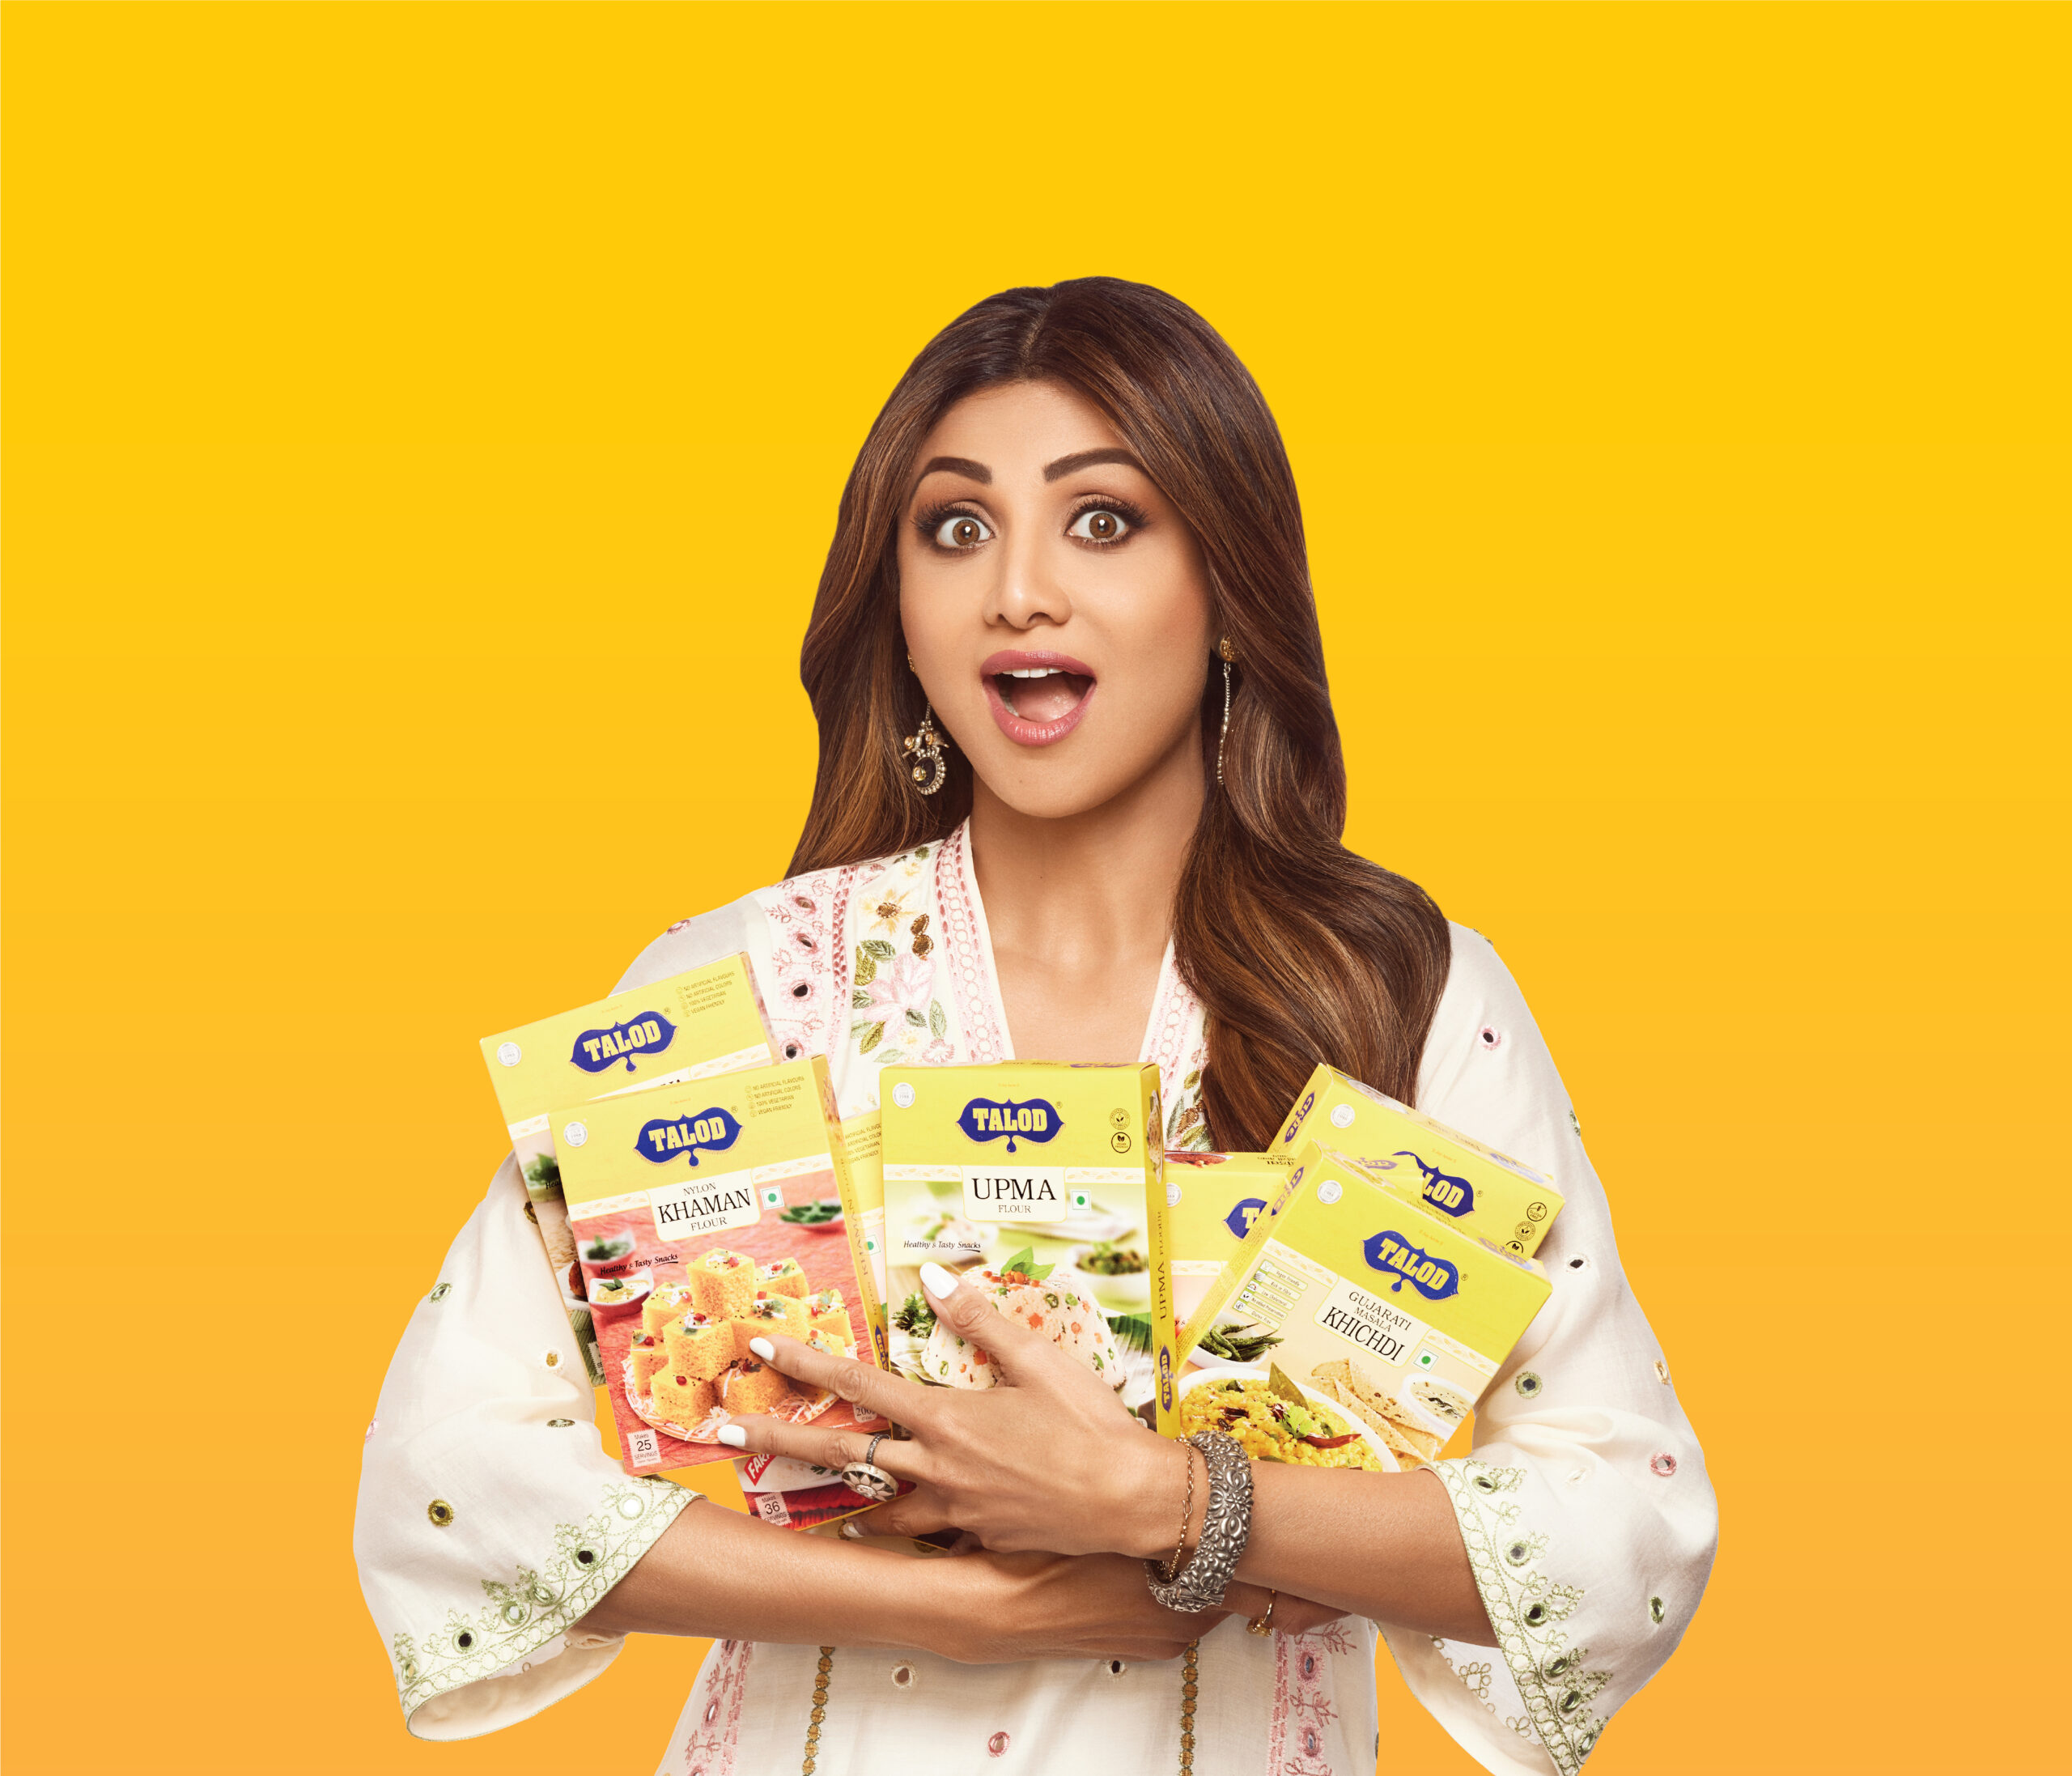 shilpa-shetty-teams-up-with-talod-foods-expertateverything